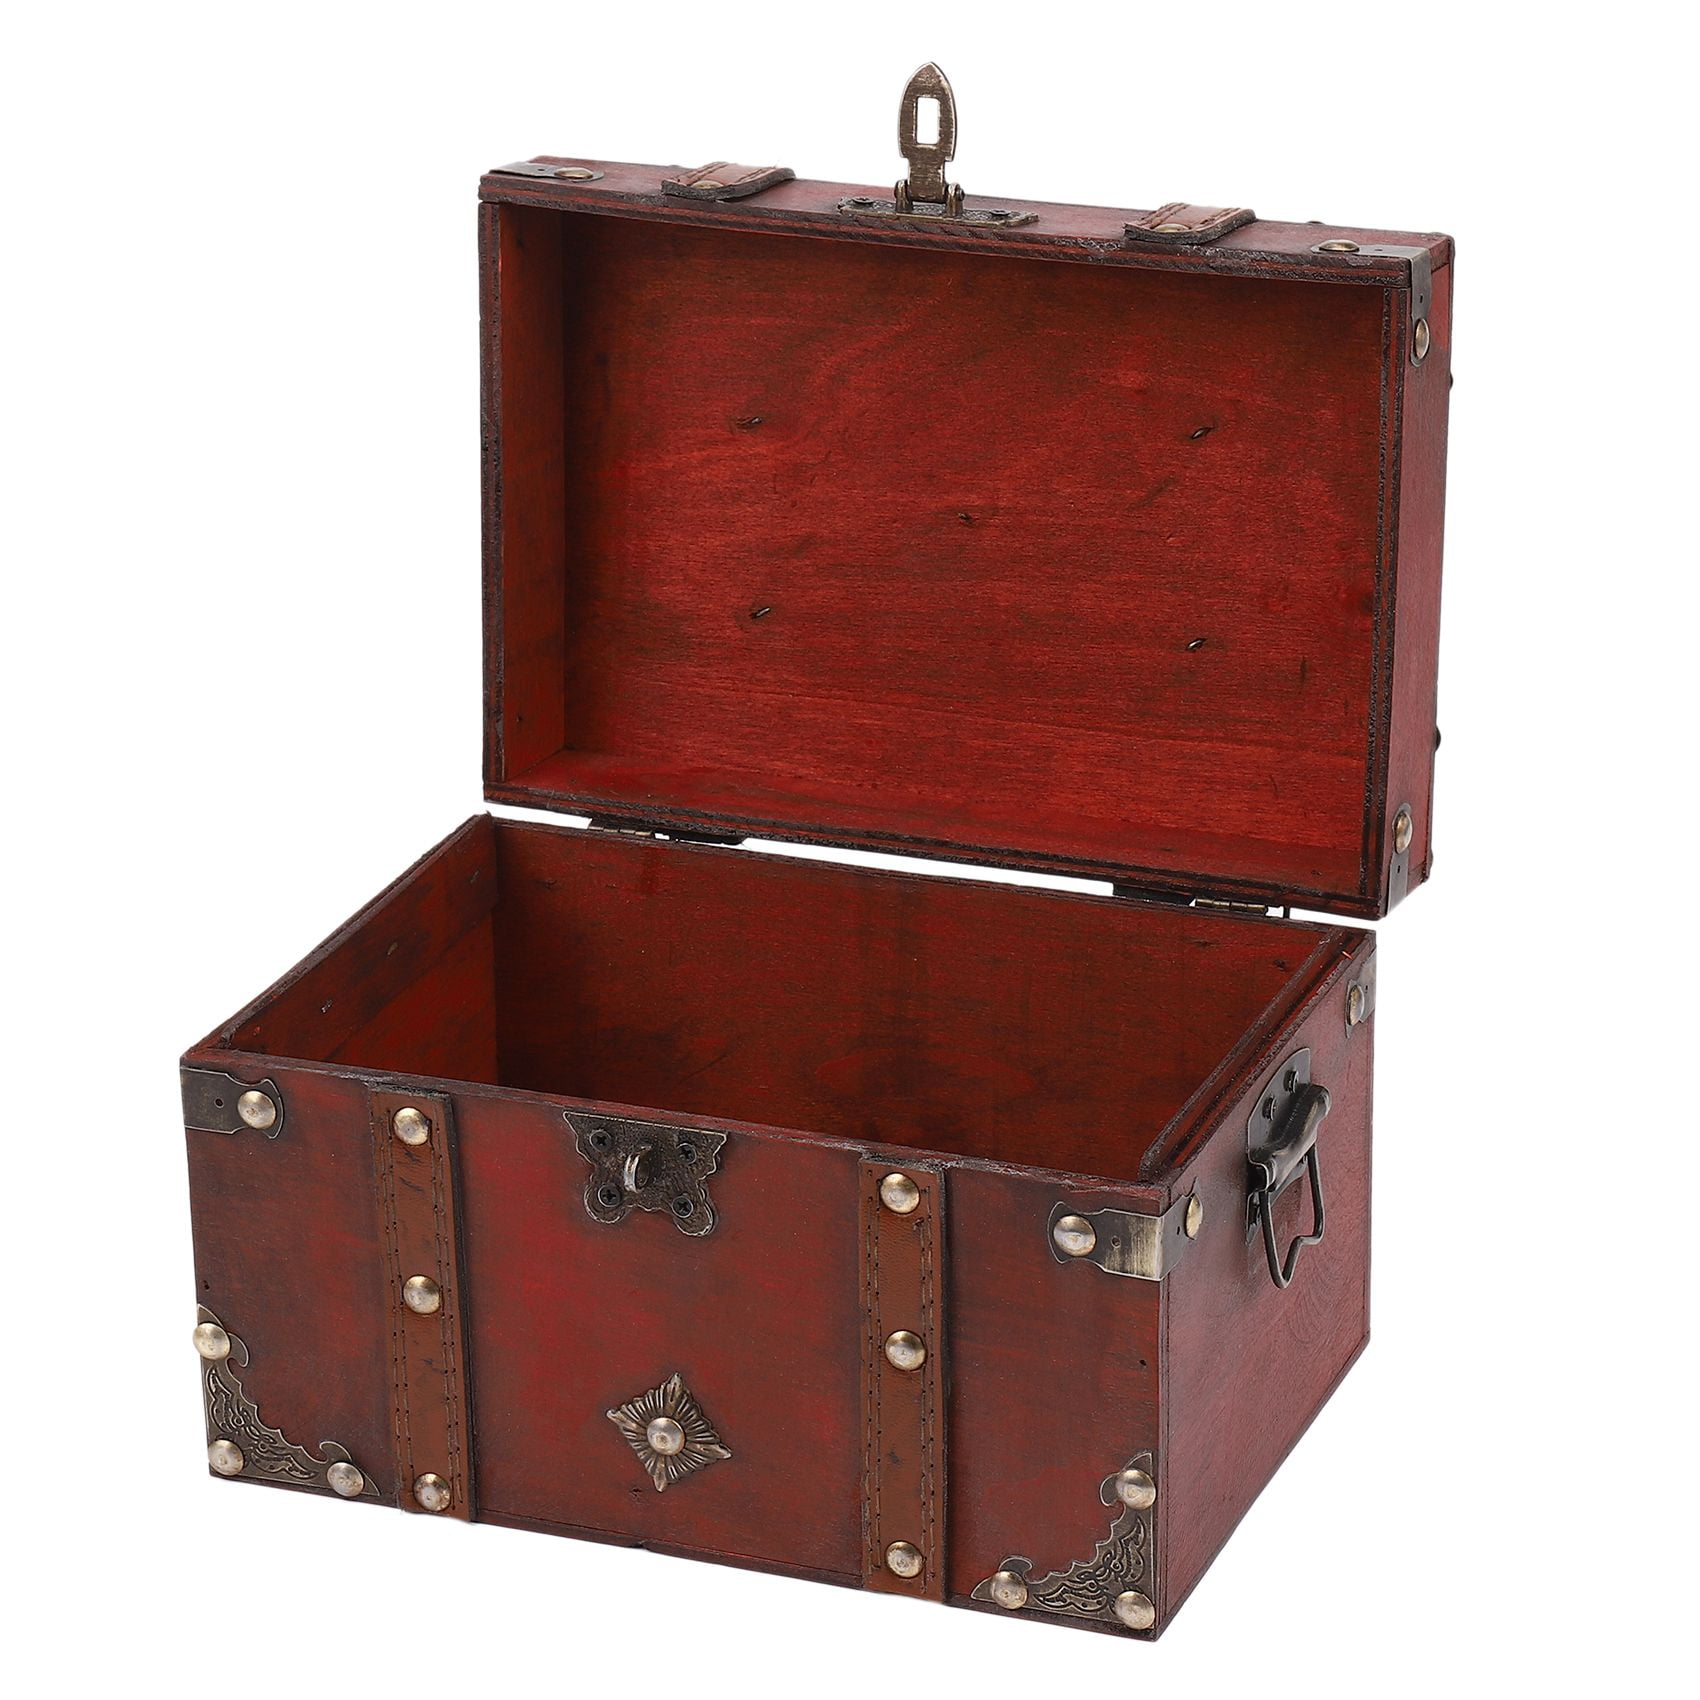 Classic Treasure Chest Wooden Jewelry Trinket Storage Box Case Holder with Lock